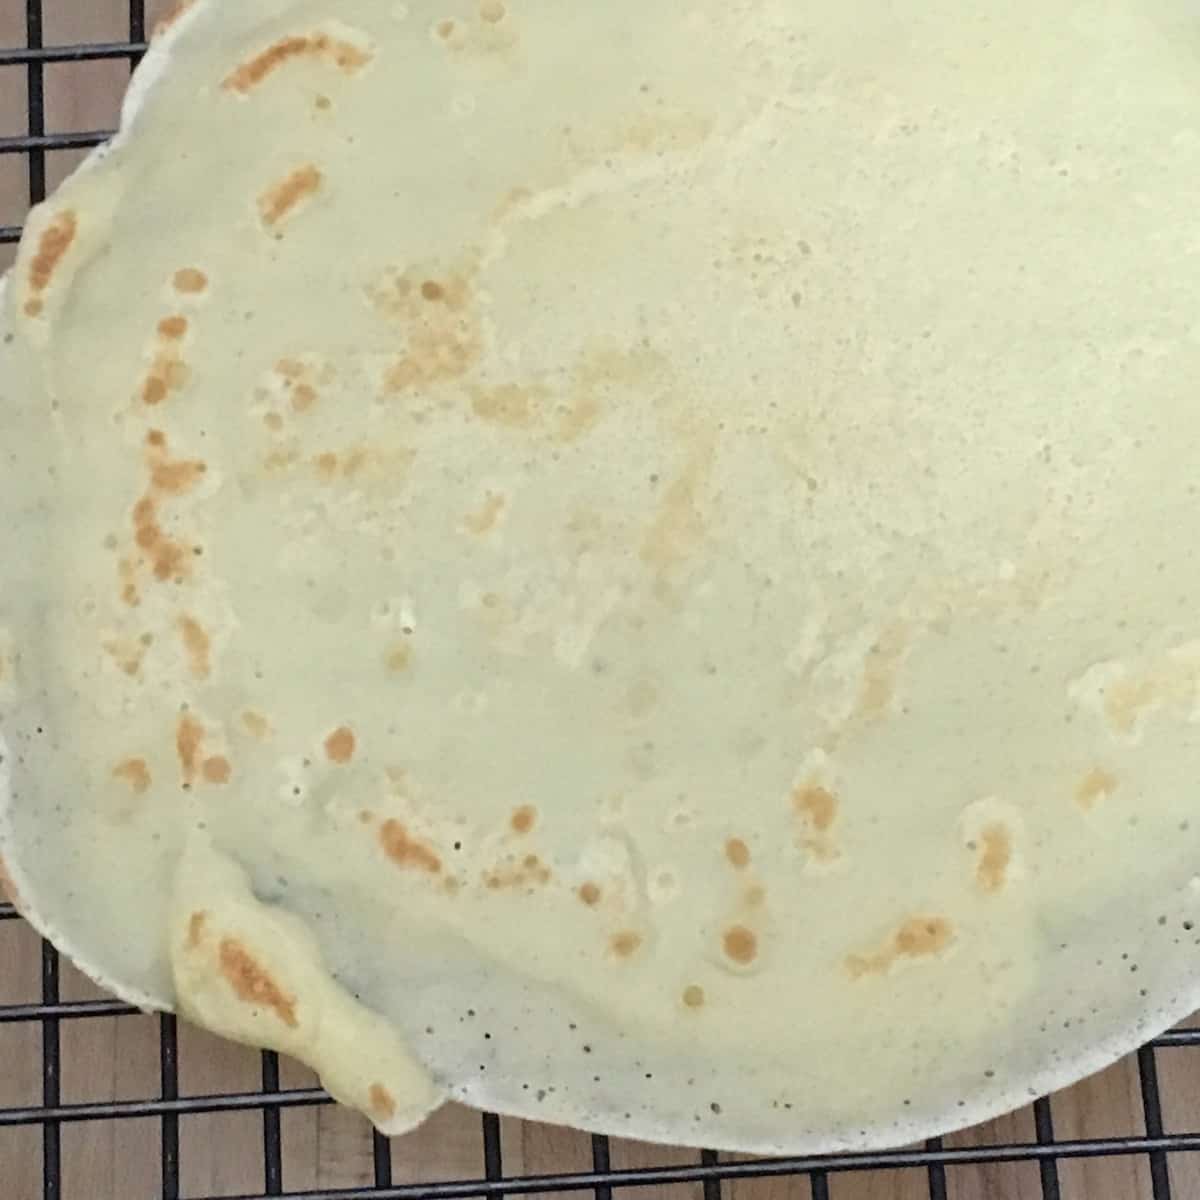 Cooked crepe.